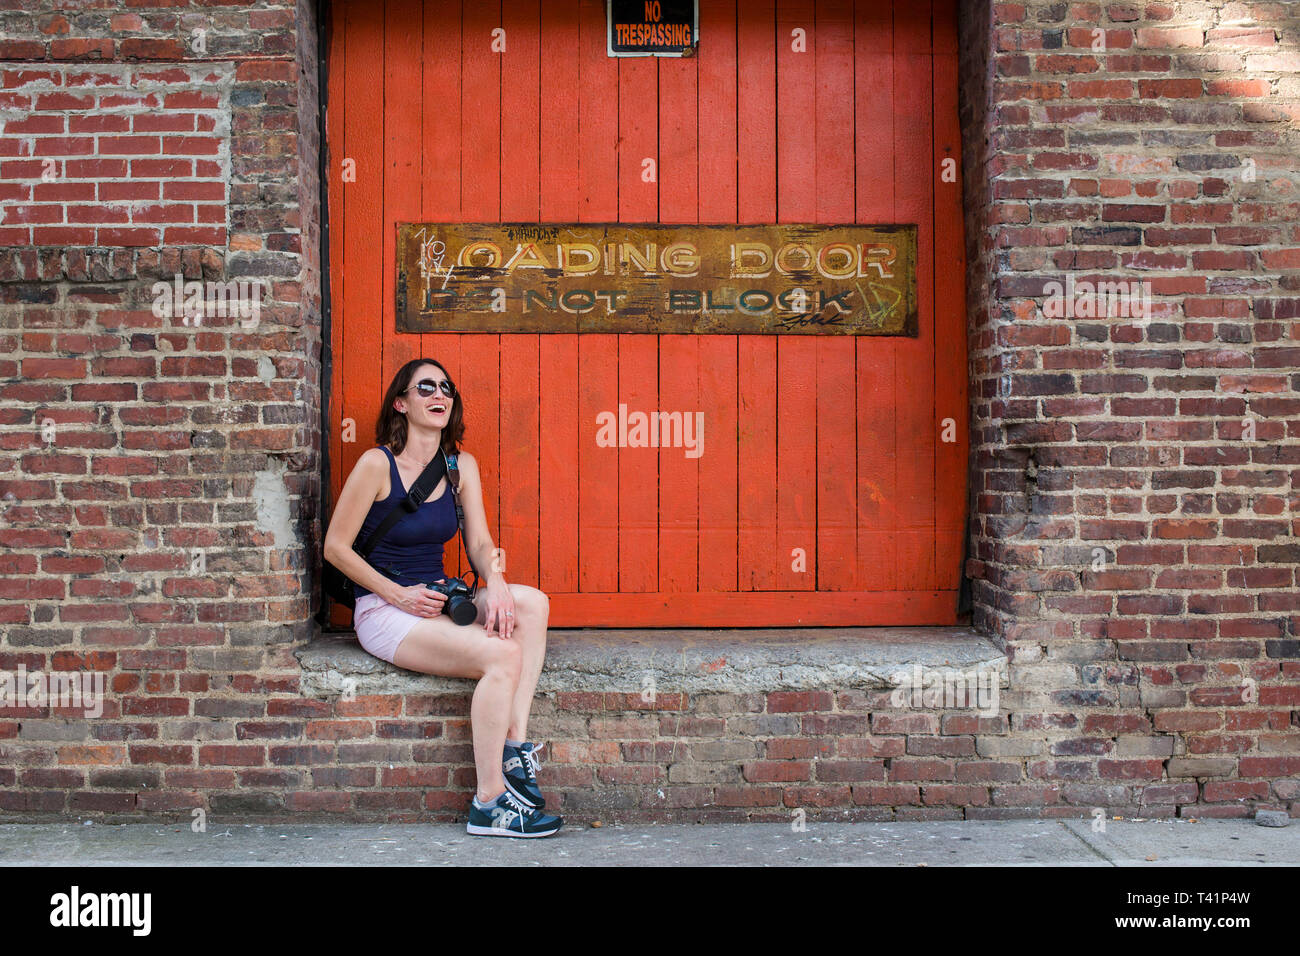 a laughing woman tourist sits on a brick wall in an alley Stock Photo